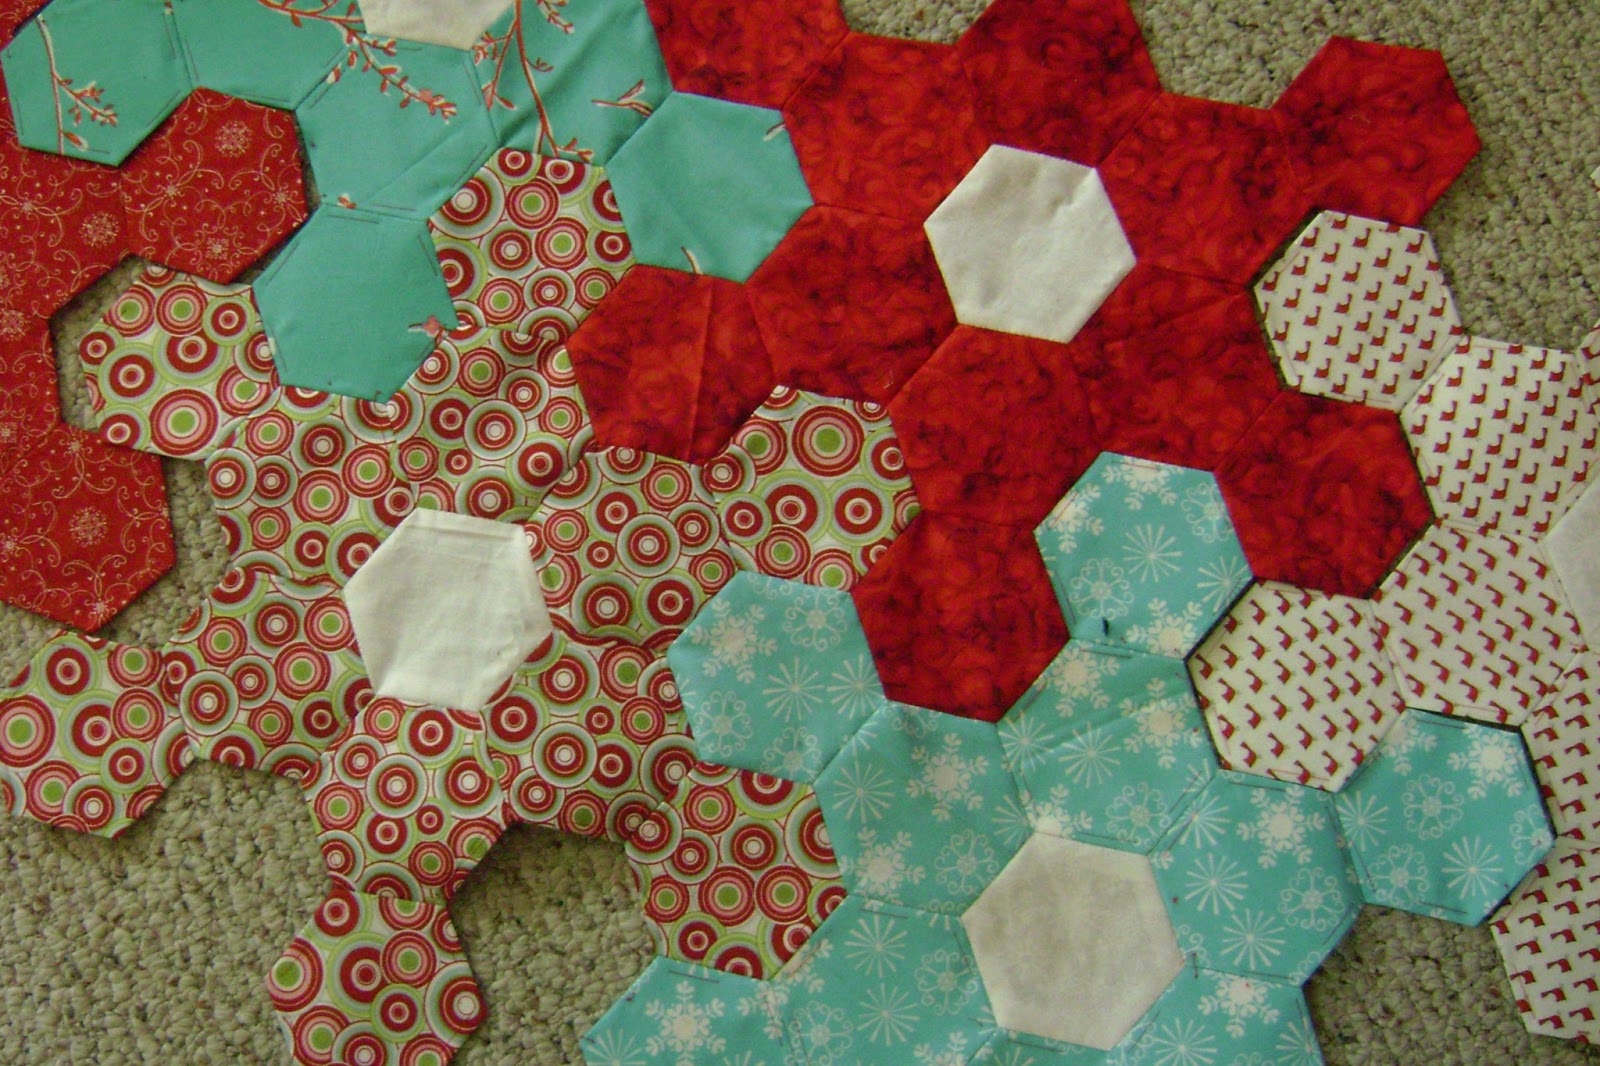 And lately, because the tiny hexagons were getting to me, I have been putti...